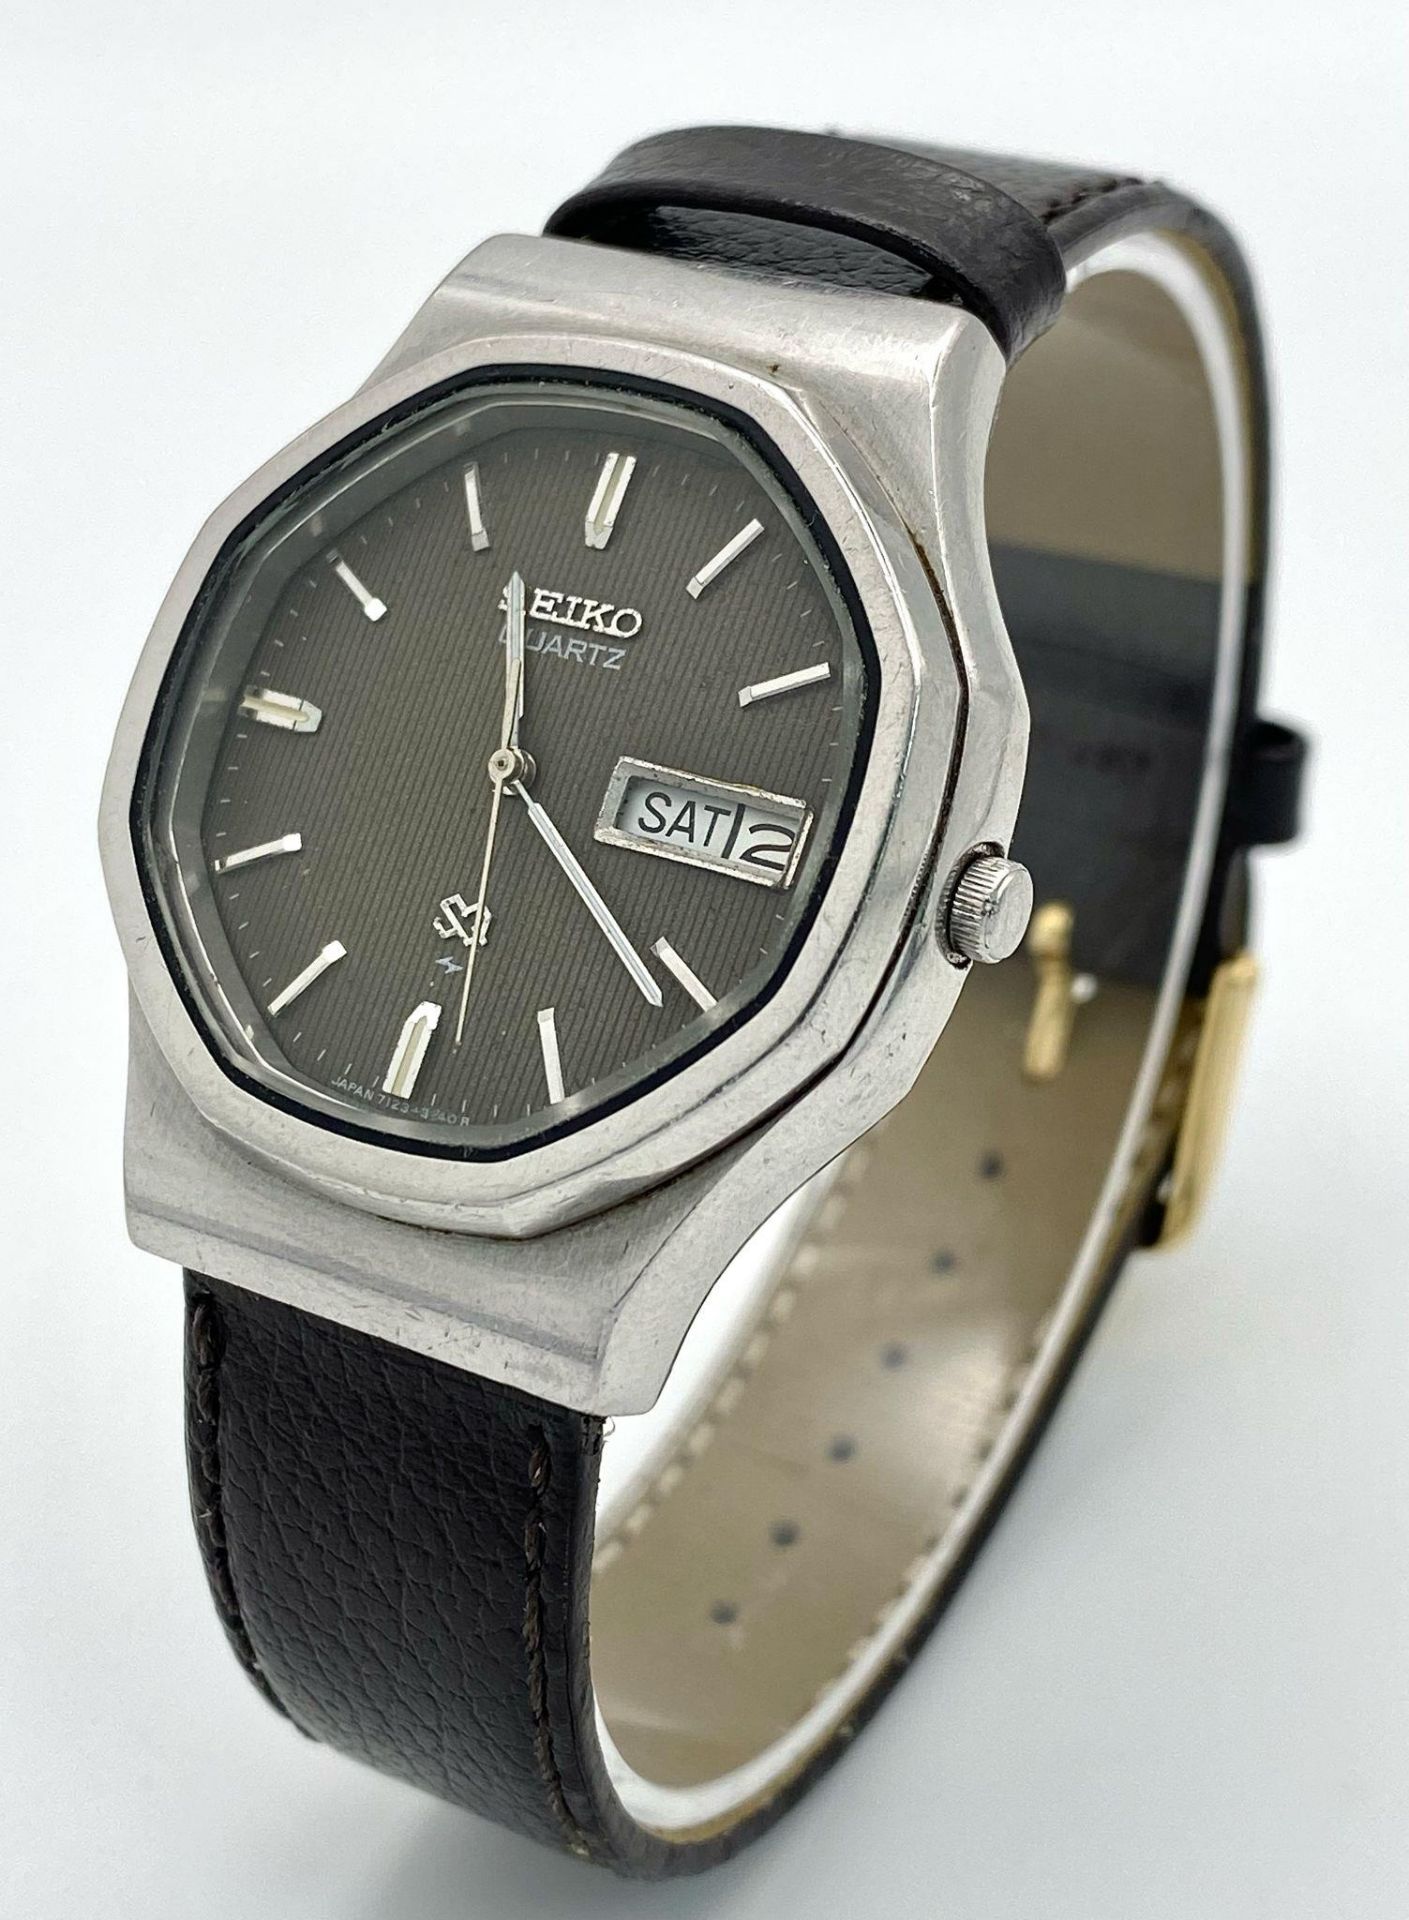 A Vintage Seiko Quartz Watch. Black leather strap. Octagonal case - 36mm. Grey dial with day/date